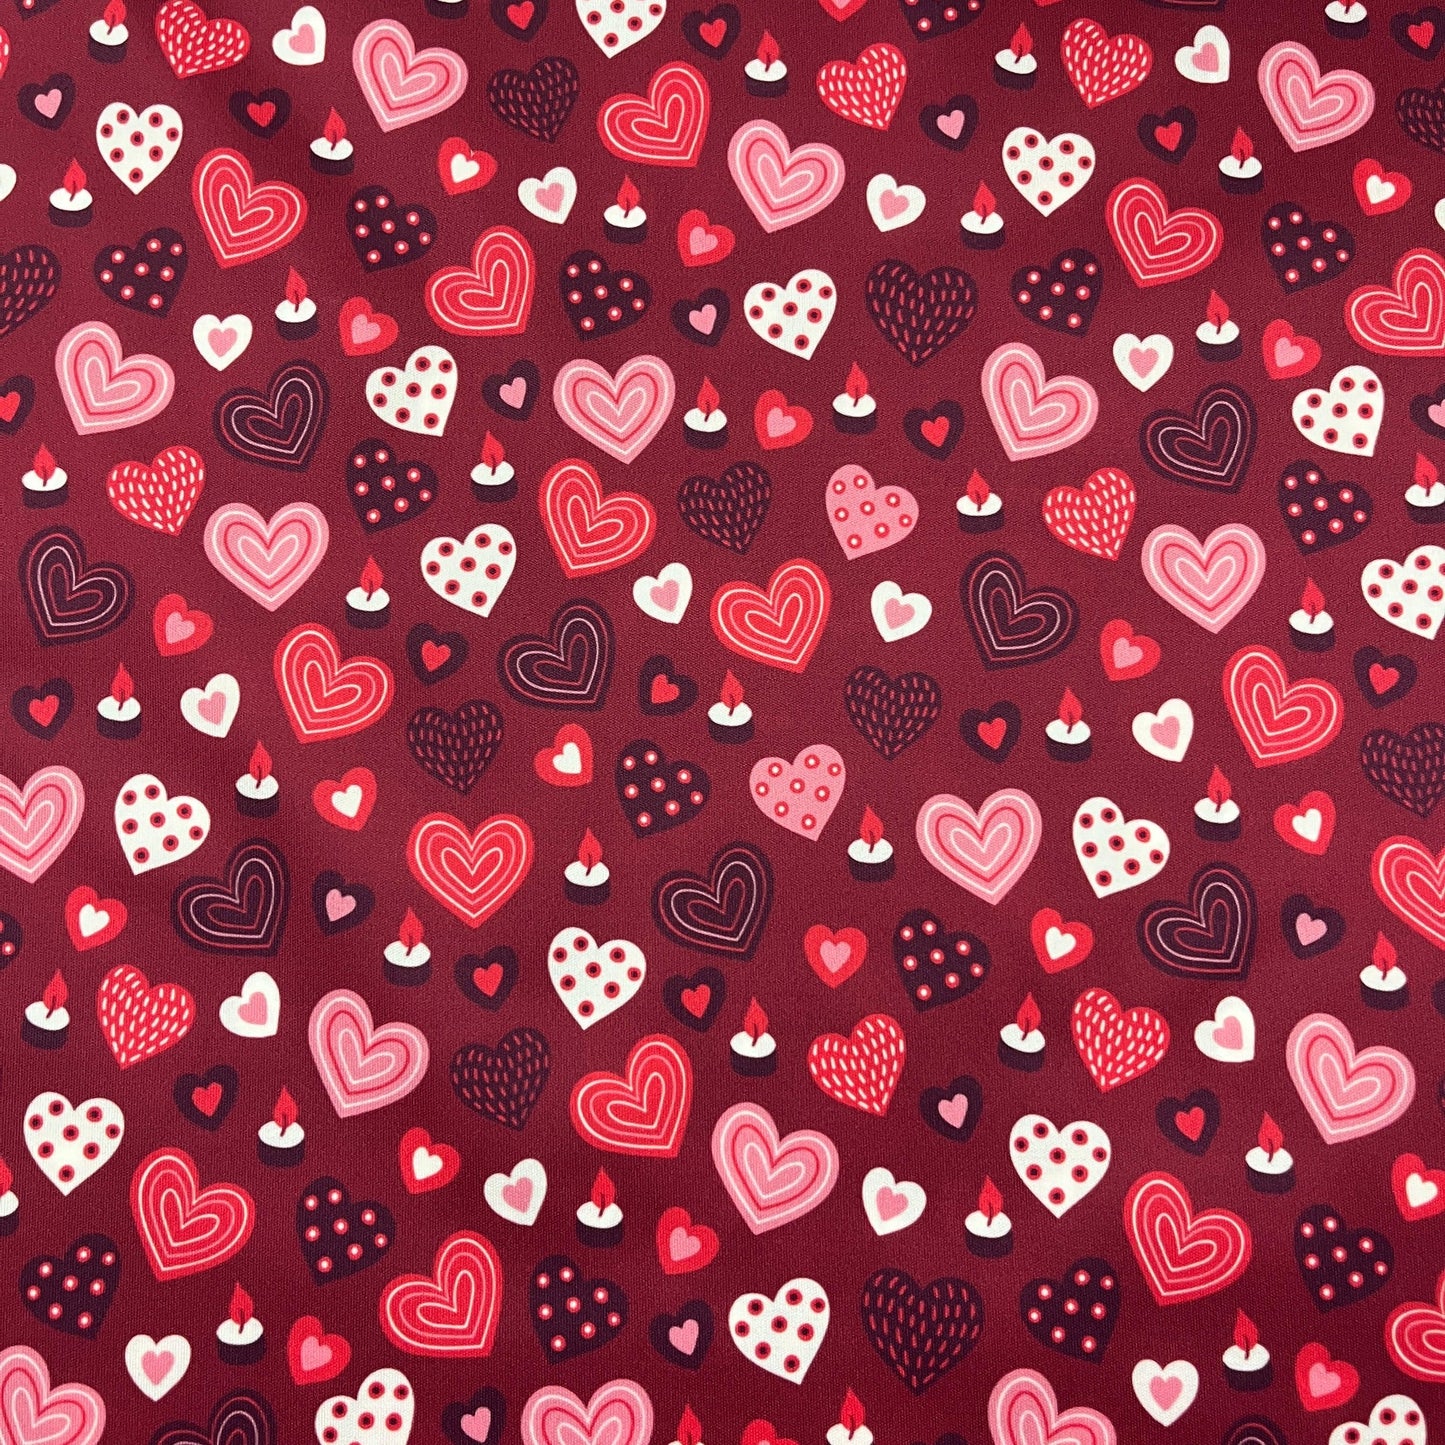 Heart and Candle Toss 1 mil PUL Fabric- Made in the USA - Nature's Fabrics